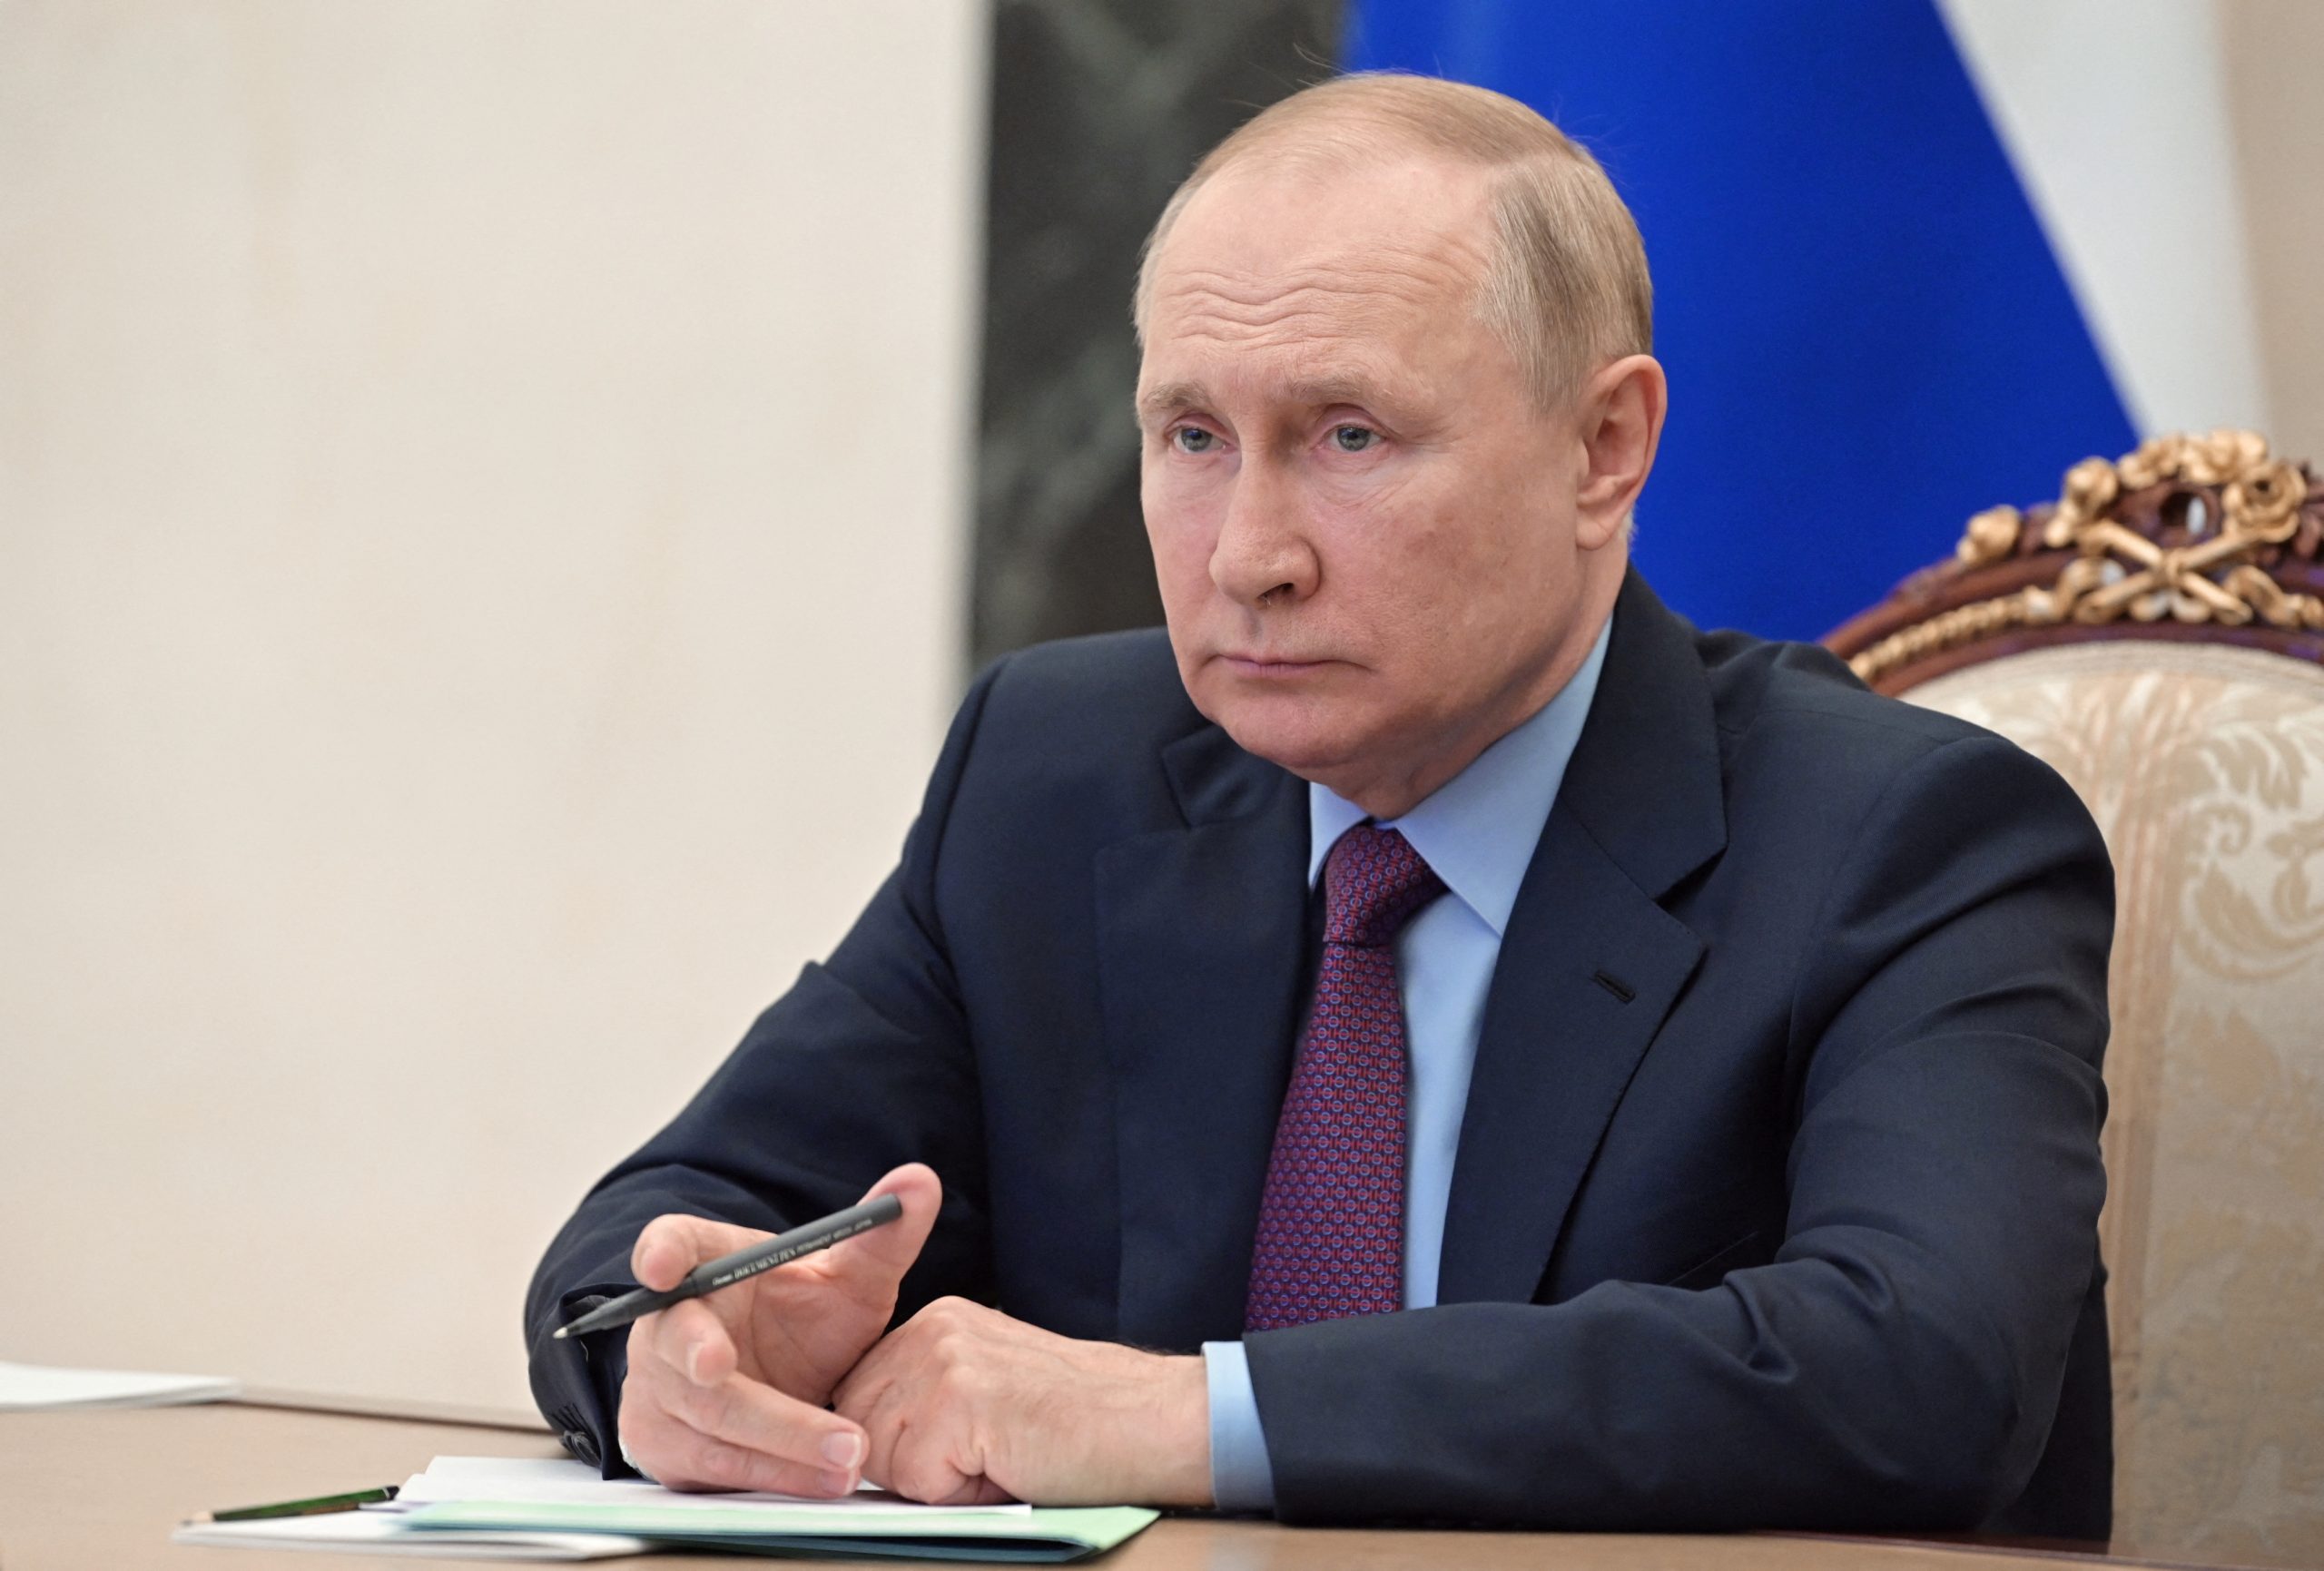 Russian President Vladimir Putin chairs a meeting on the development of the country's metallurgical sector, via a video link at the Kremlin in Moscow, Russia August 1, 2022.